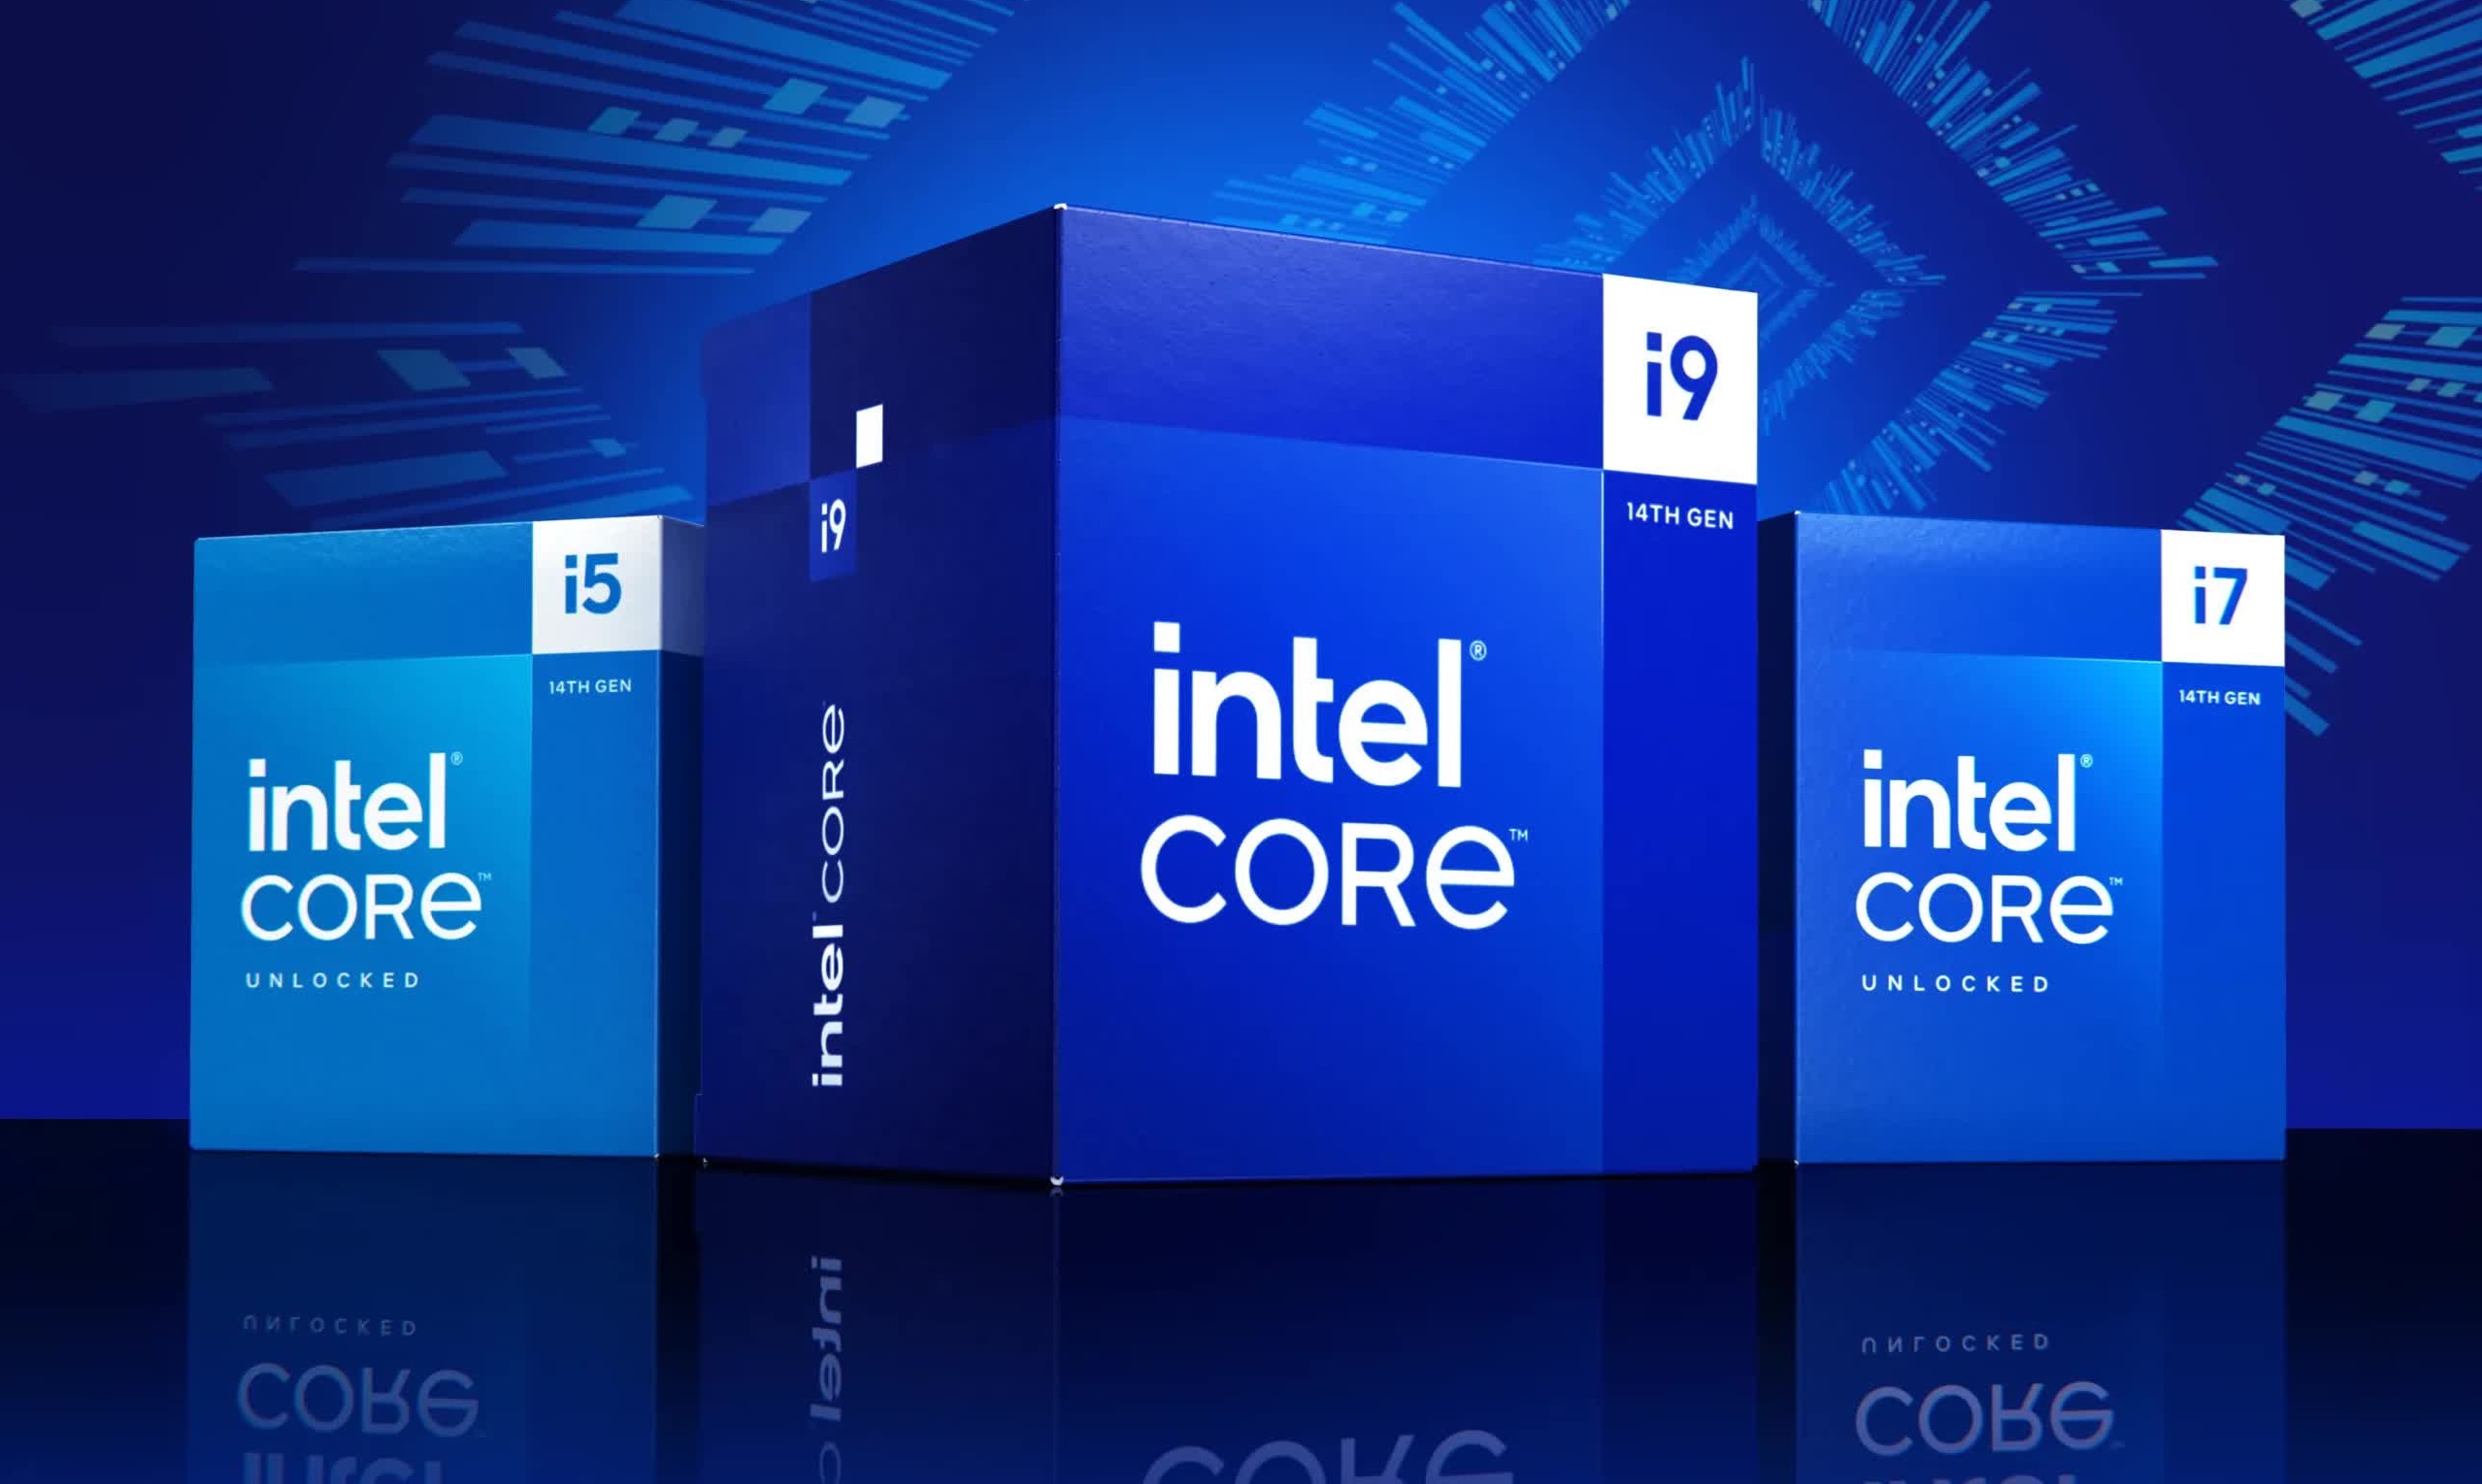 Intel’s giving their older CPUs a boost with Intel Application Optimization